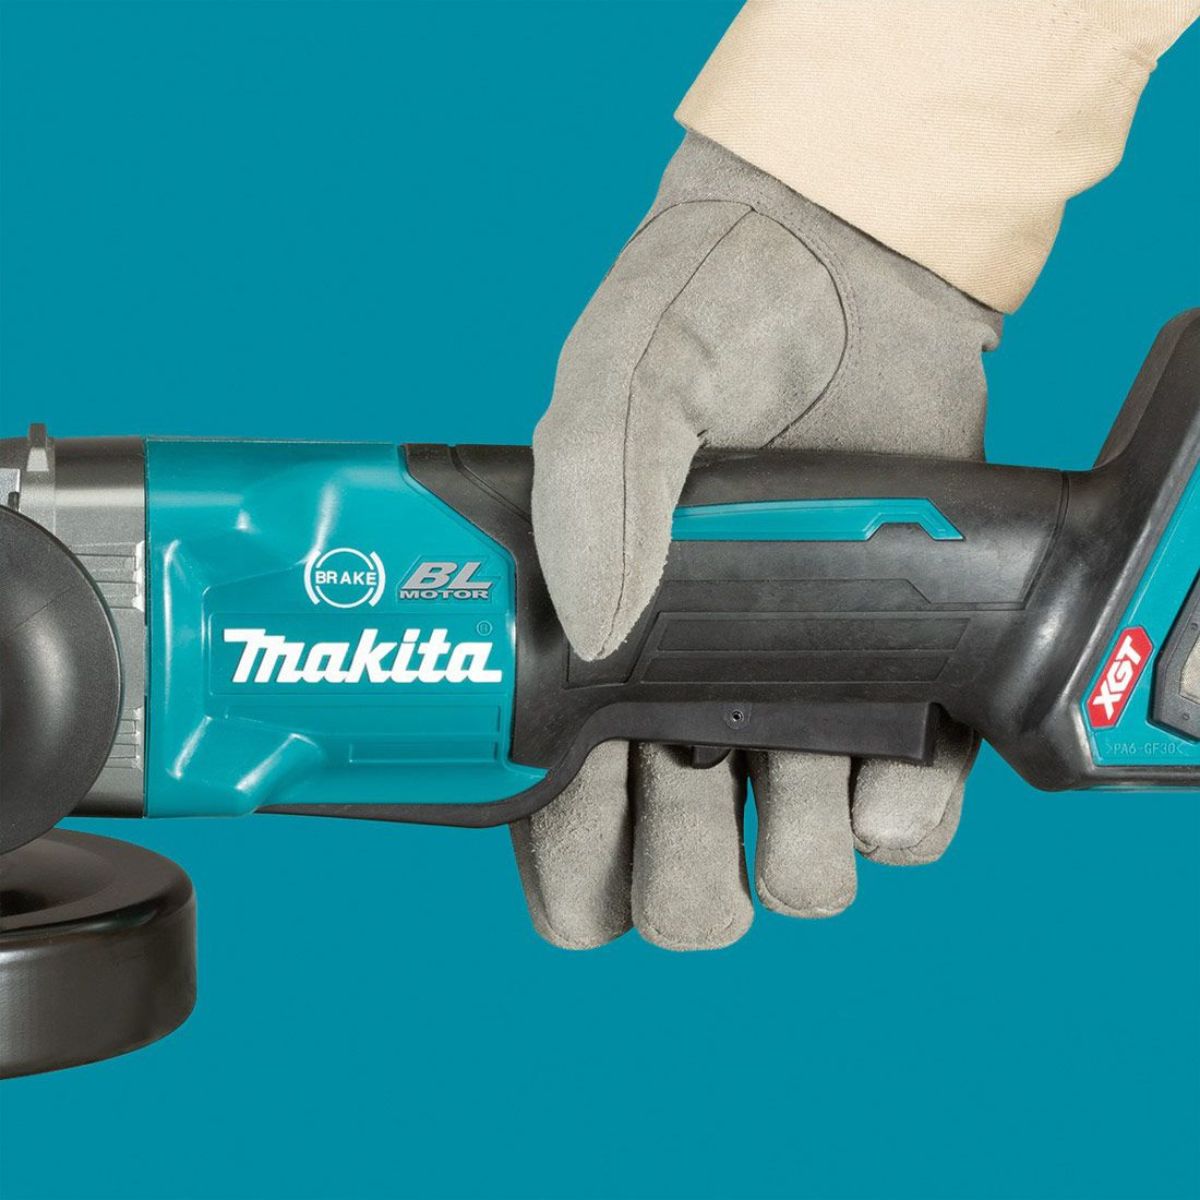 Makita GA029GZ01 40v XGT Max 125mm Brushless Angle Grinder Body Only With Carry Case